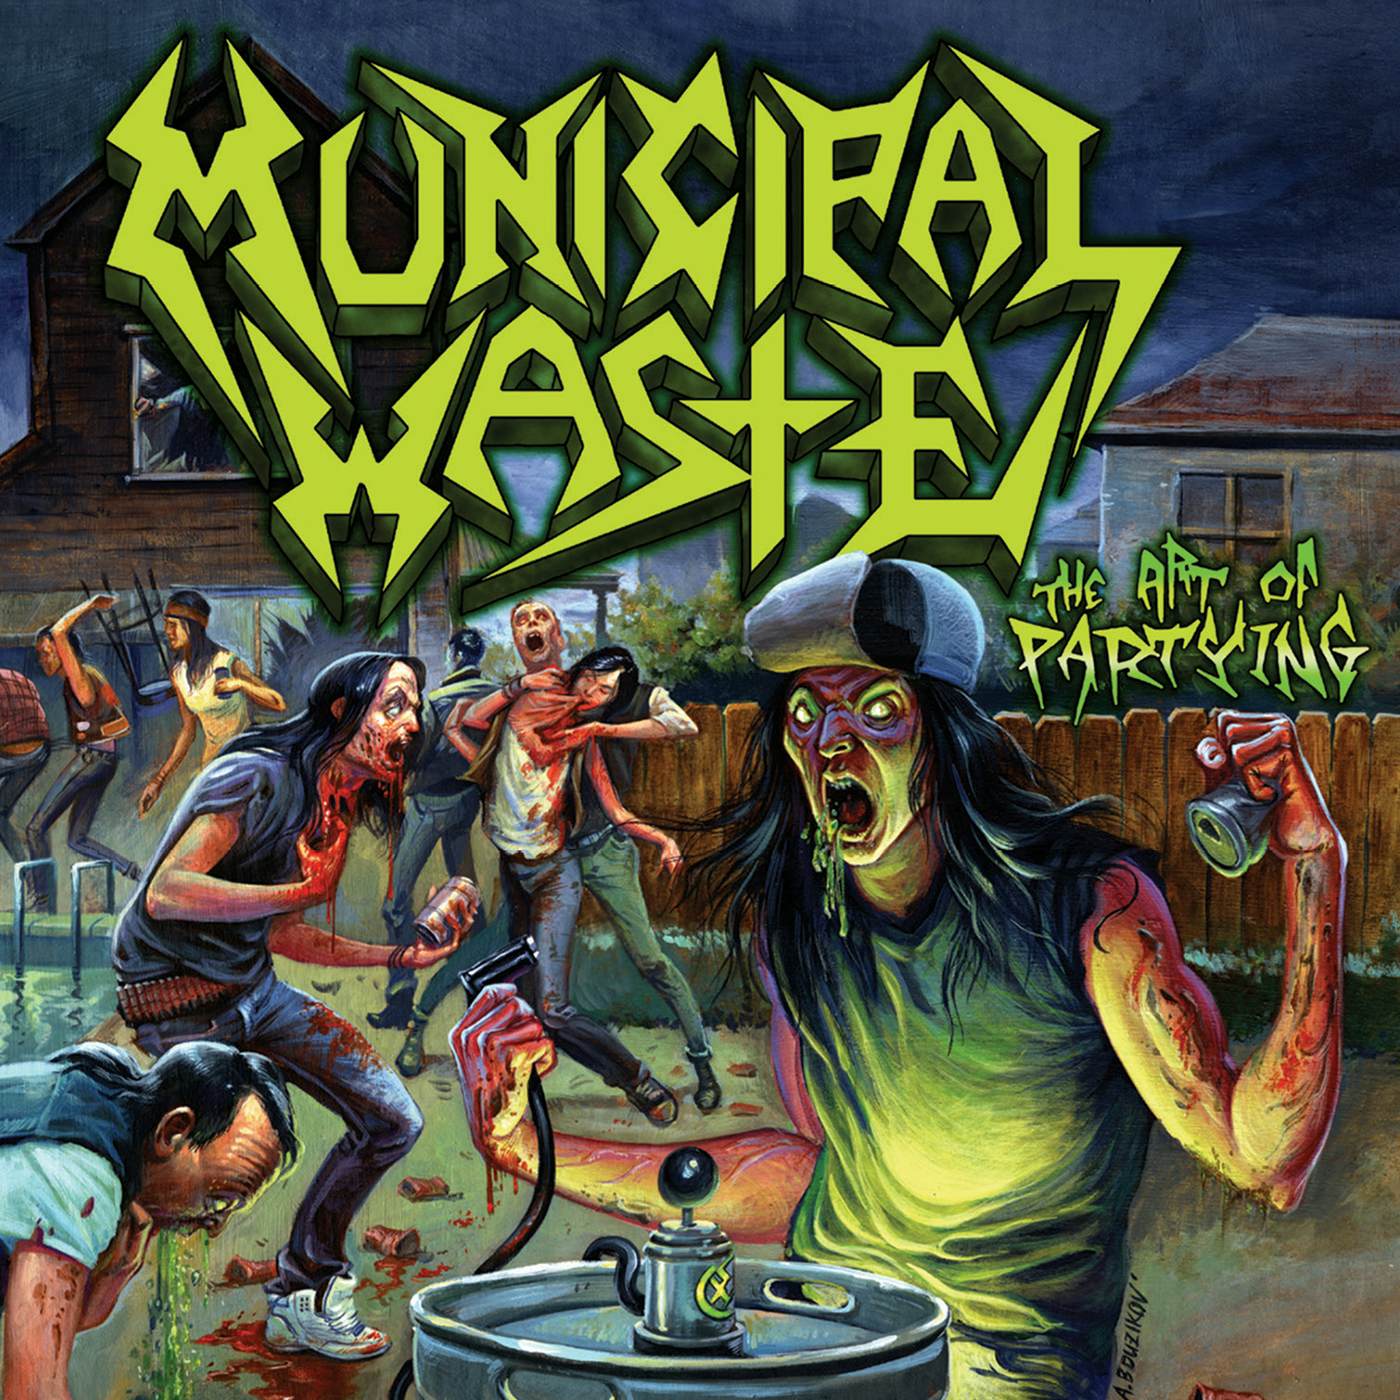 Municipal Waste ART OF PARTYING Vinyl Record